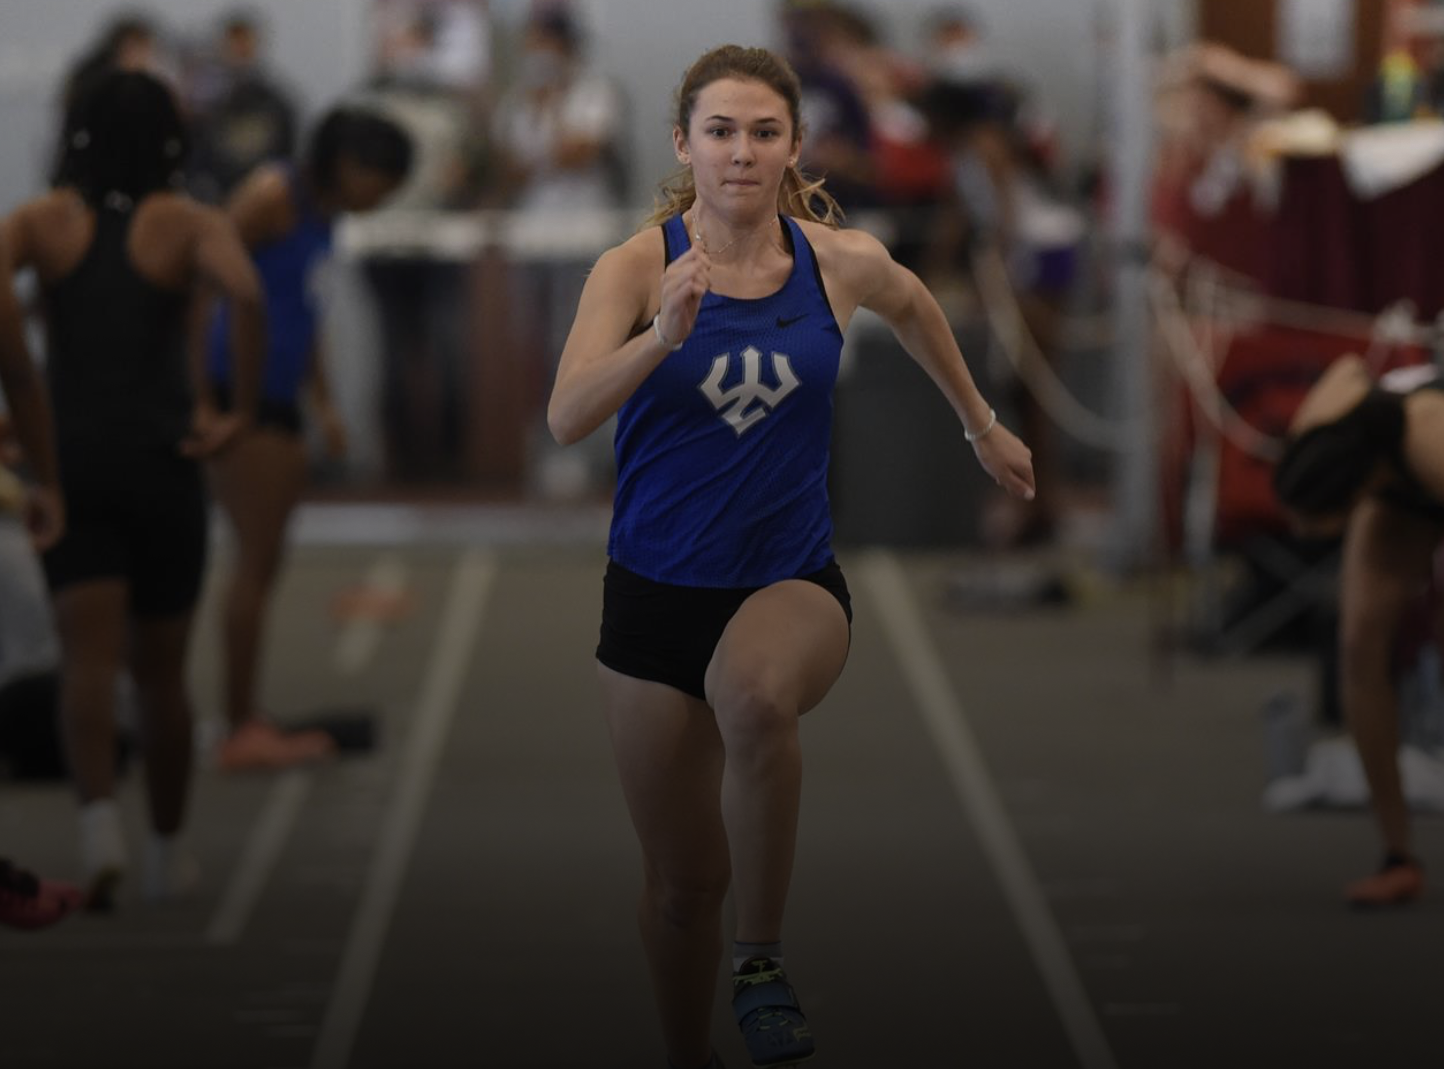 W&L women’s track sets four program records at VMI winter relays The